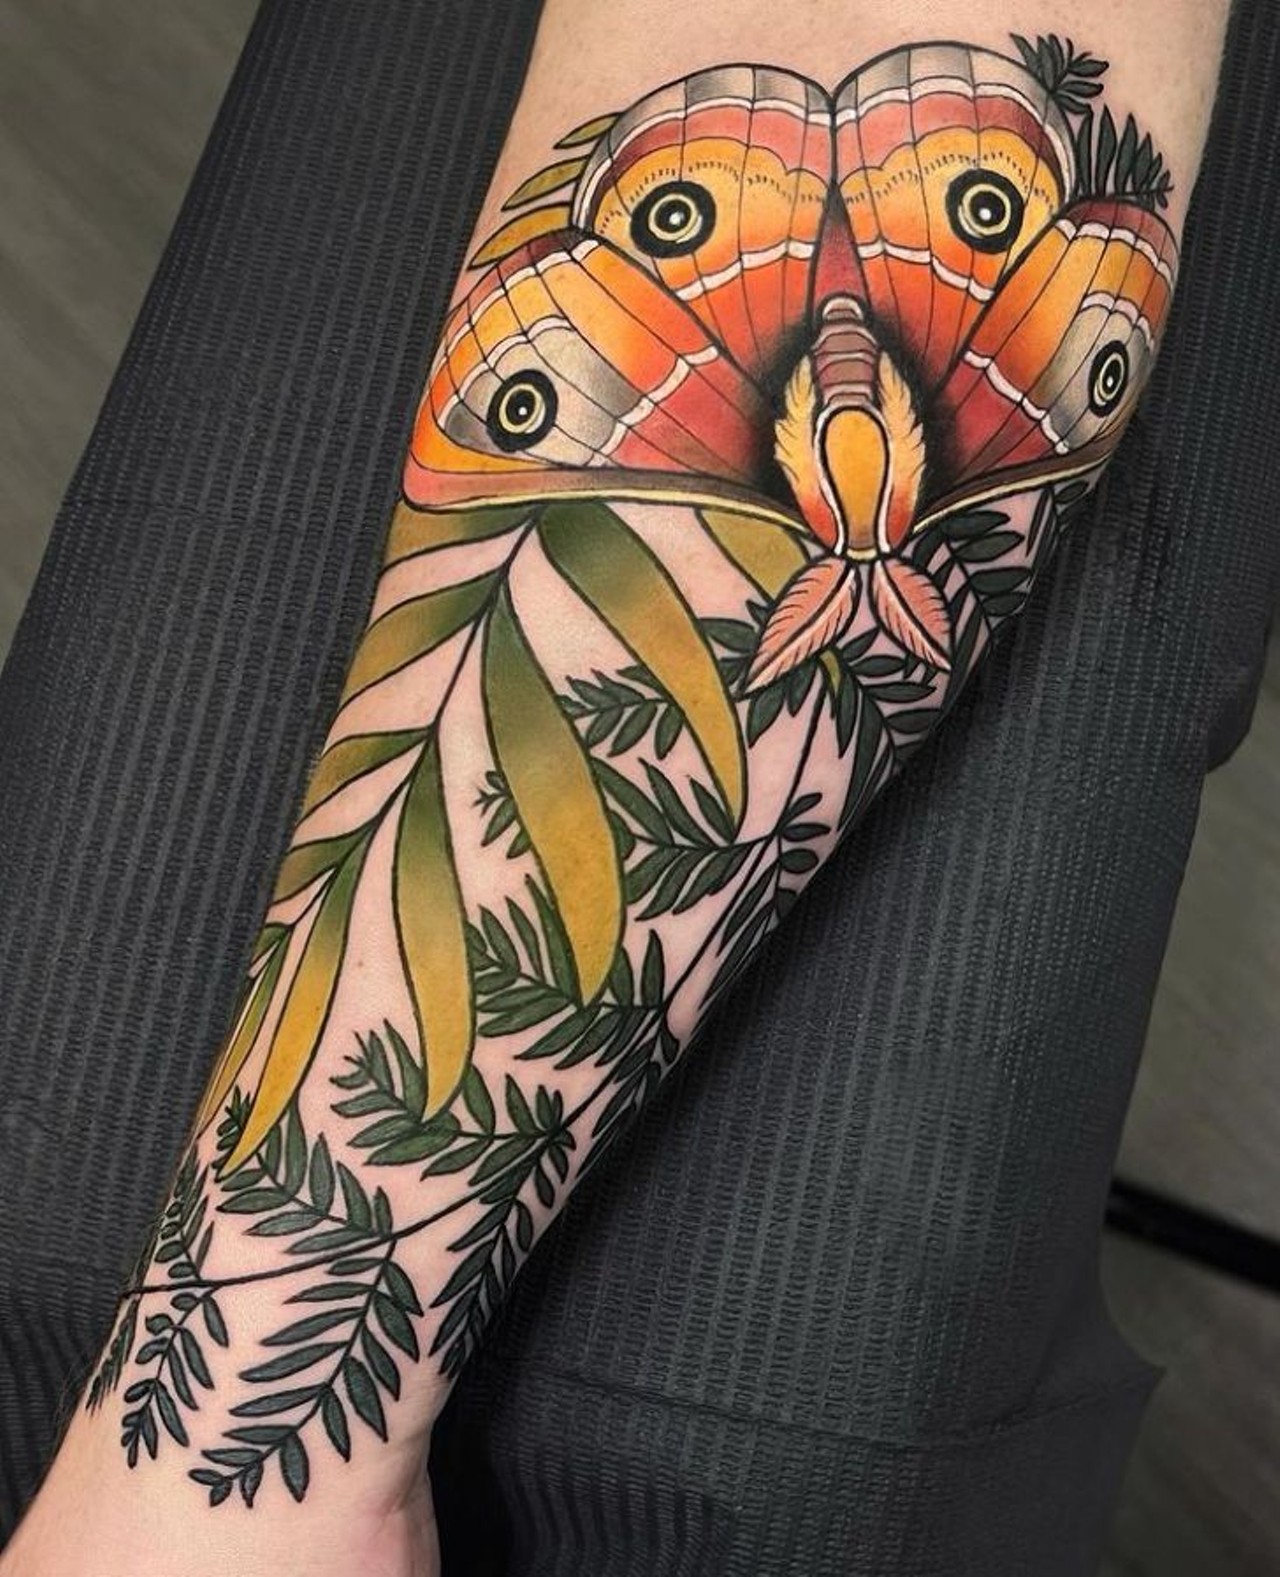 Mina Kate 
Pride &#145;N&#146; Envy Tattoos
3166 Bill Beck Blvd., Kissimmee, 407-483-4893
Check out Mina Kate&#146;s work for all neo-traditional and color needs. Her work is amongst some of the most popular at Pride &#145;N&#146; Envy Tattoos. 
Photo via minaxkate/Instagram